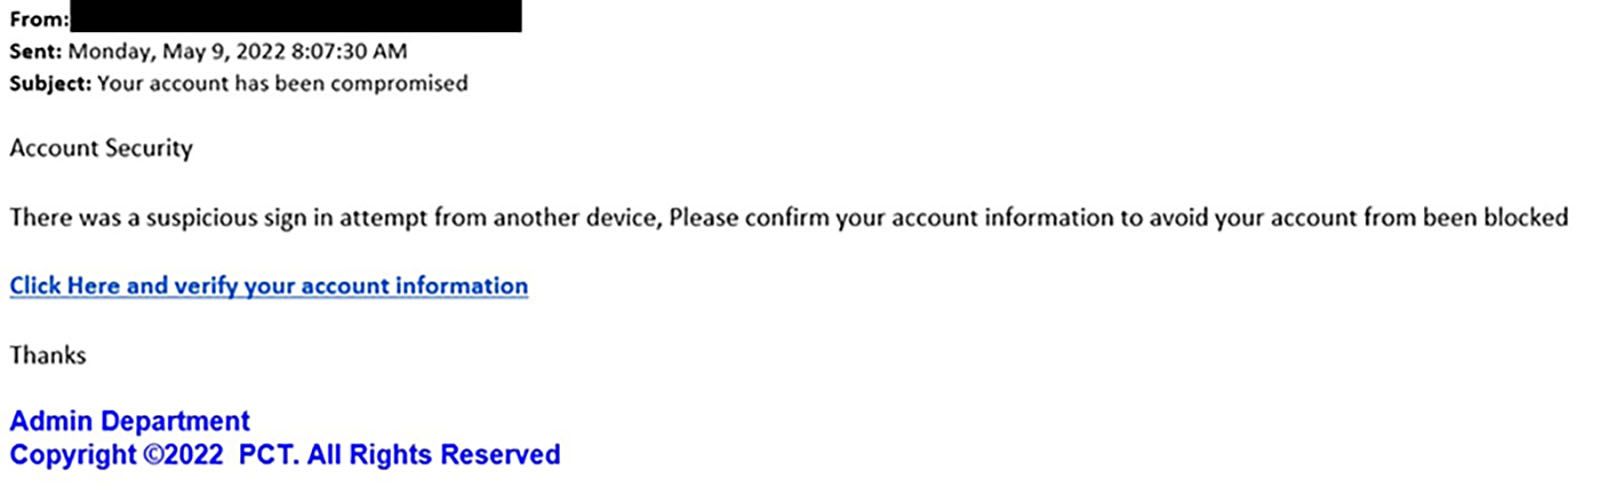 Example of malicious email notifying the user that their account has been compromised.